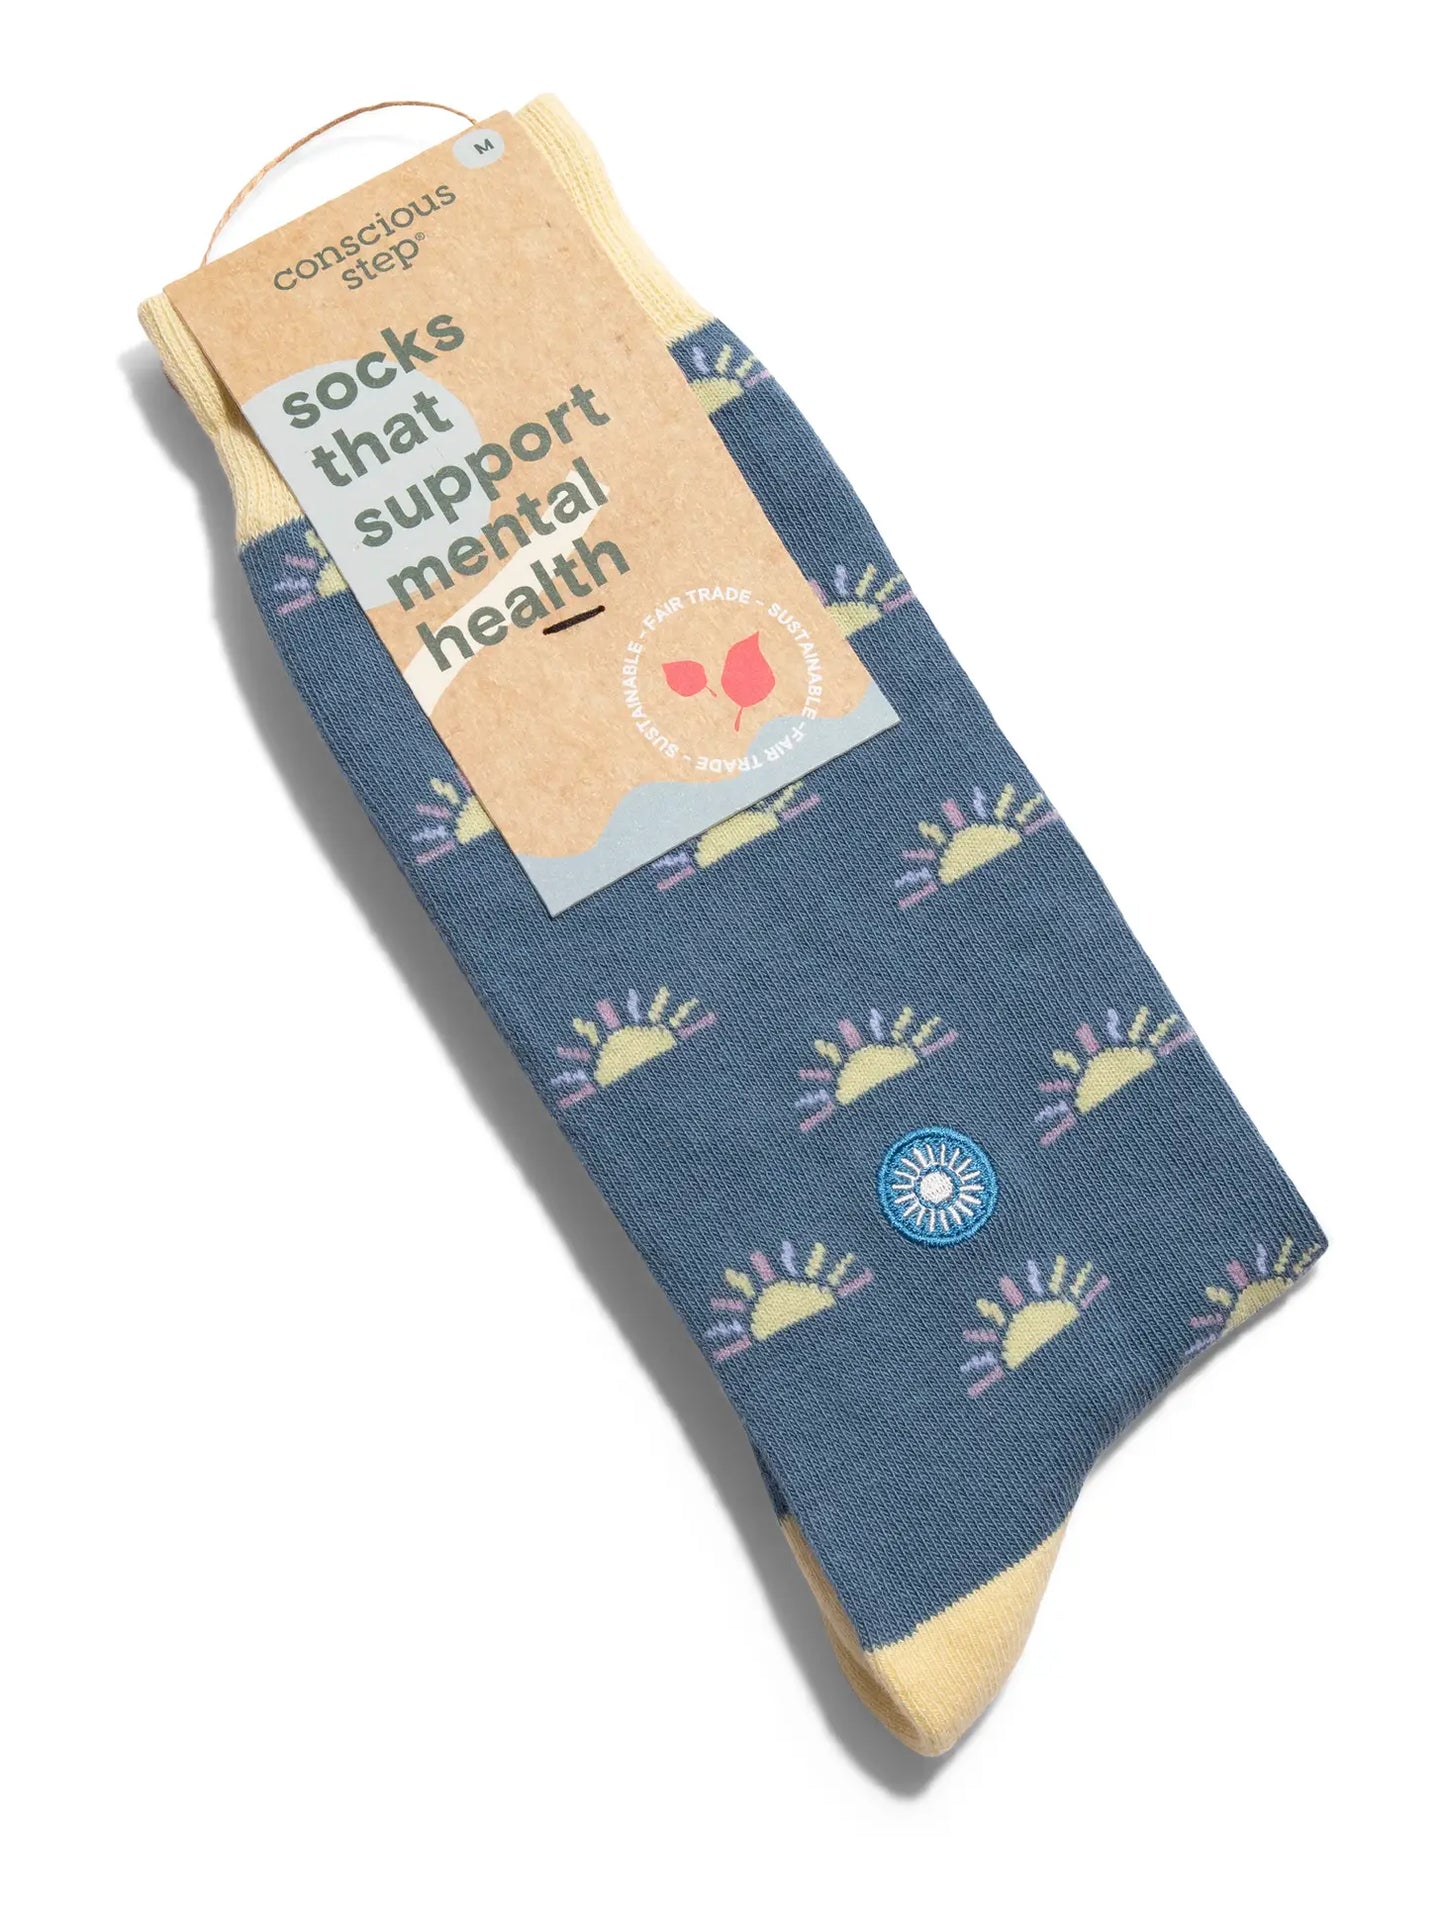 Socks that Support Mental Health - Blue and Yellow Rising Suns